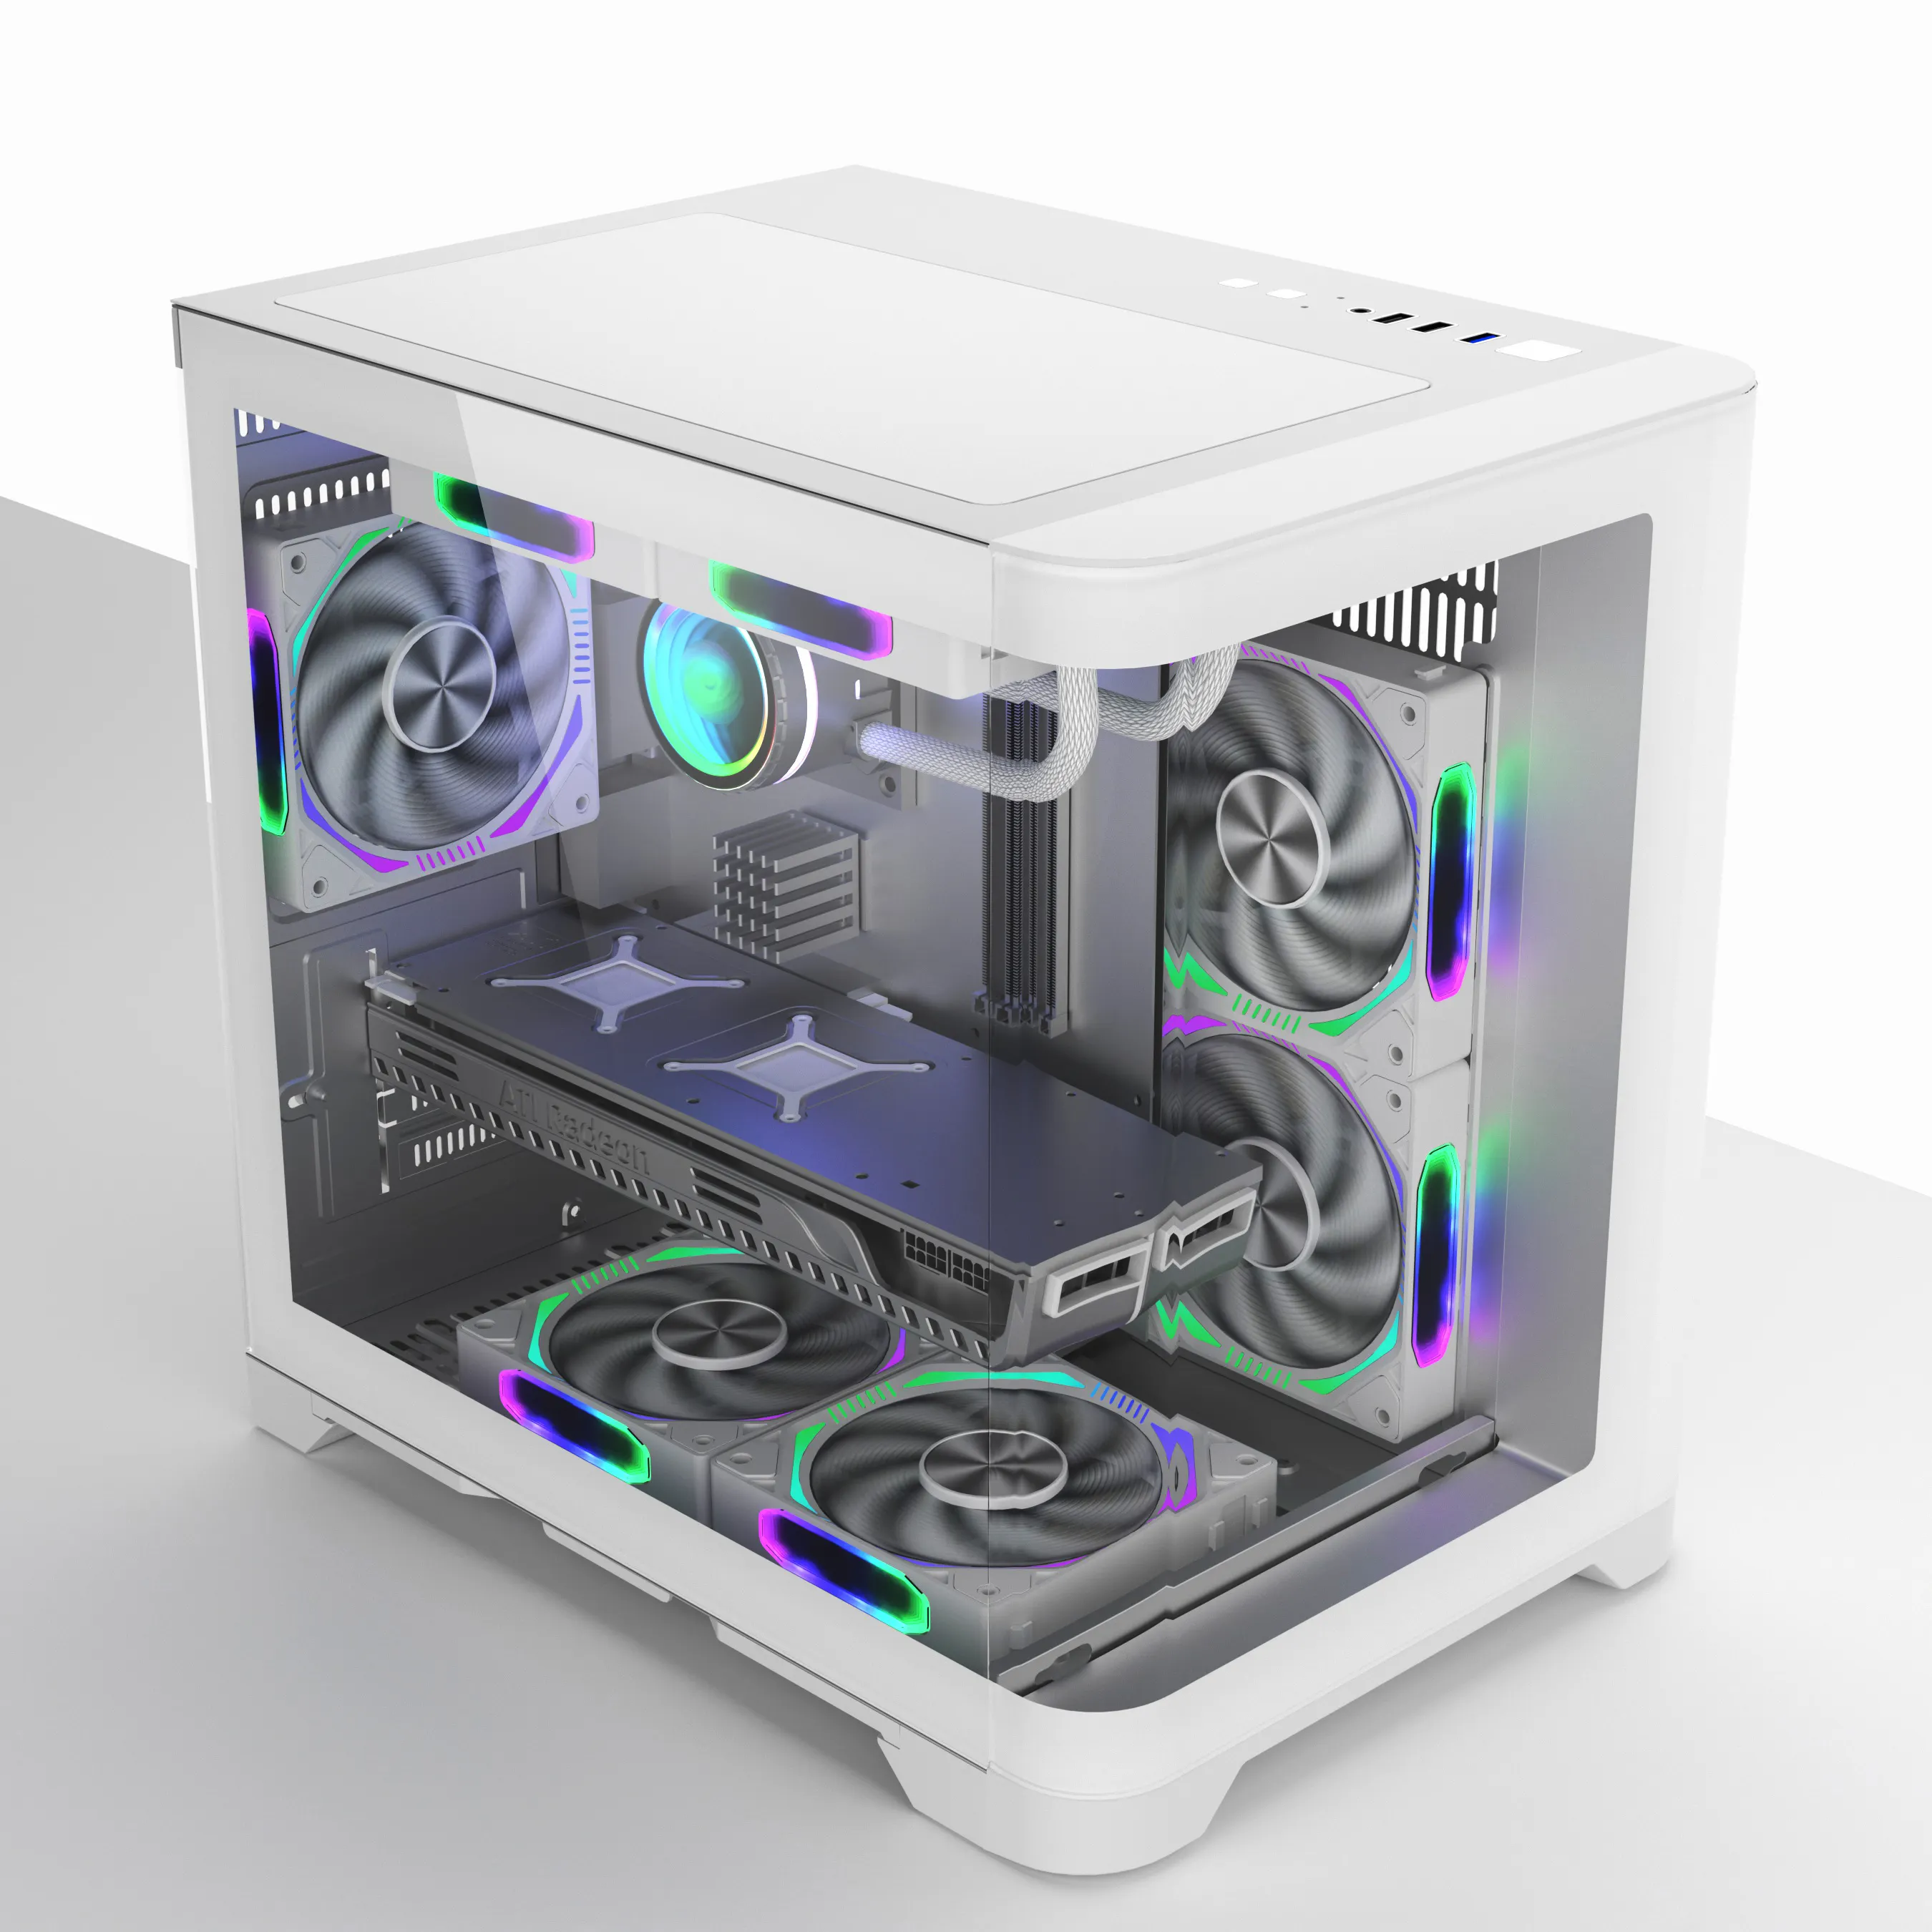 Factory New Design White MATX Gaming PC Case Desktop Chassis Curved Glass Panel Mid Tower CPU Cabinet Computer Case for Gamer